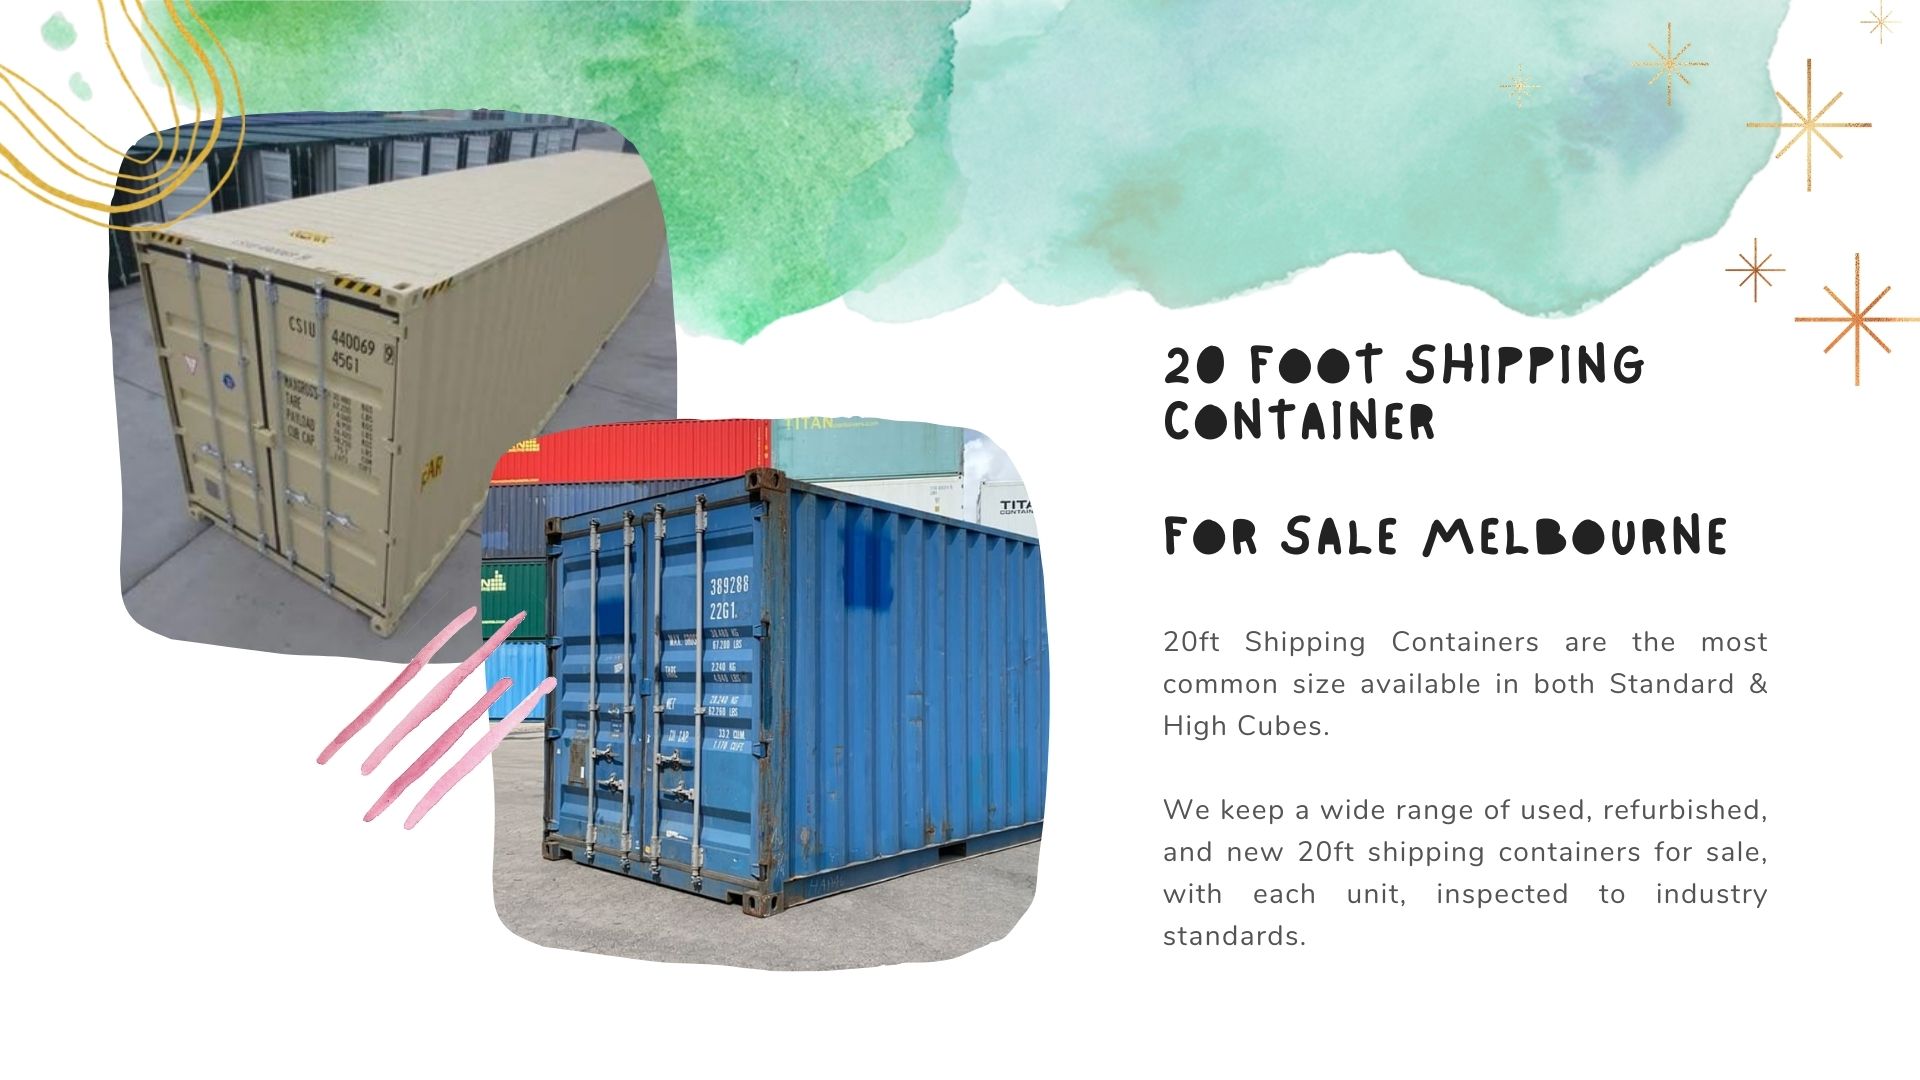 20 foot shipping container for sale melbourne